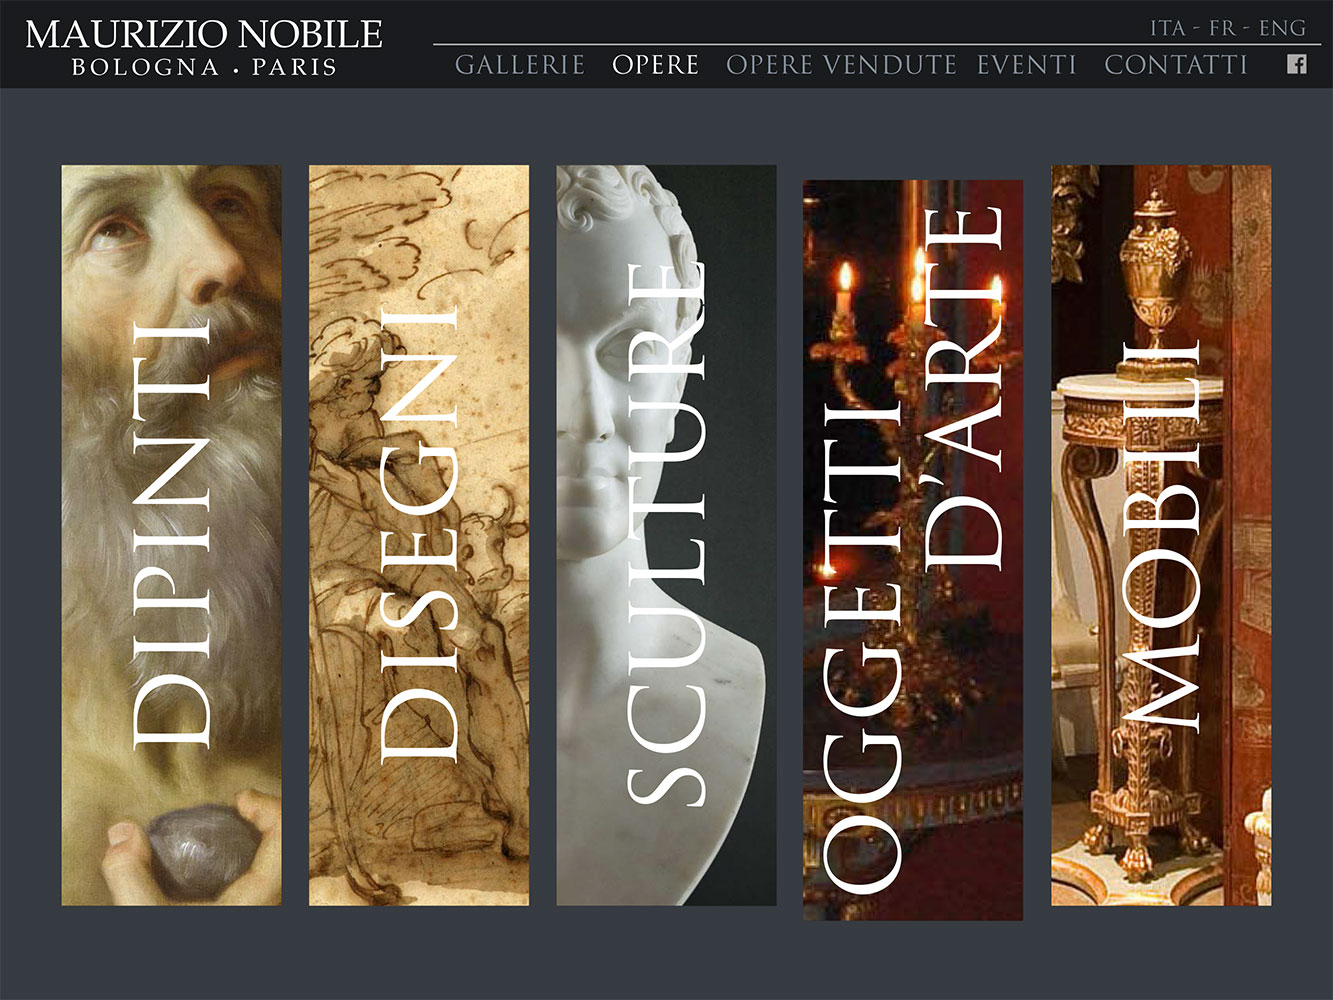 UI design of the Categories page for M. Nobile